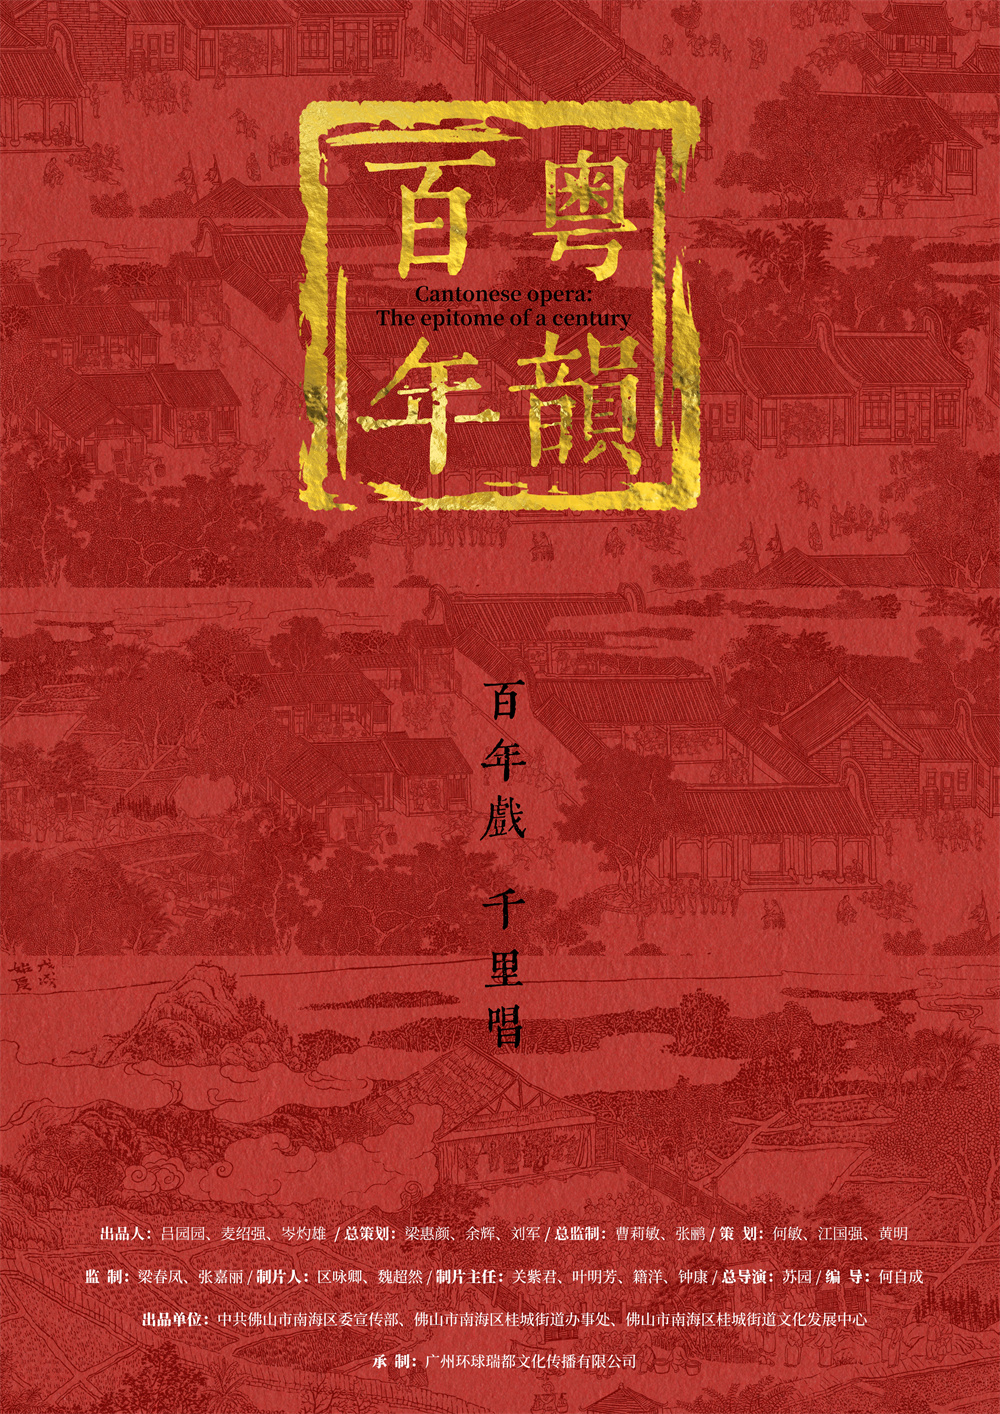 "One Hundred Years of Cantonese Rhyme" poster